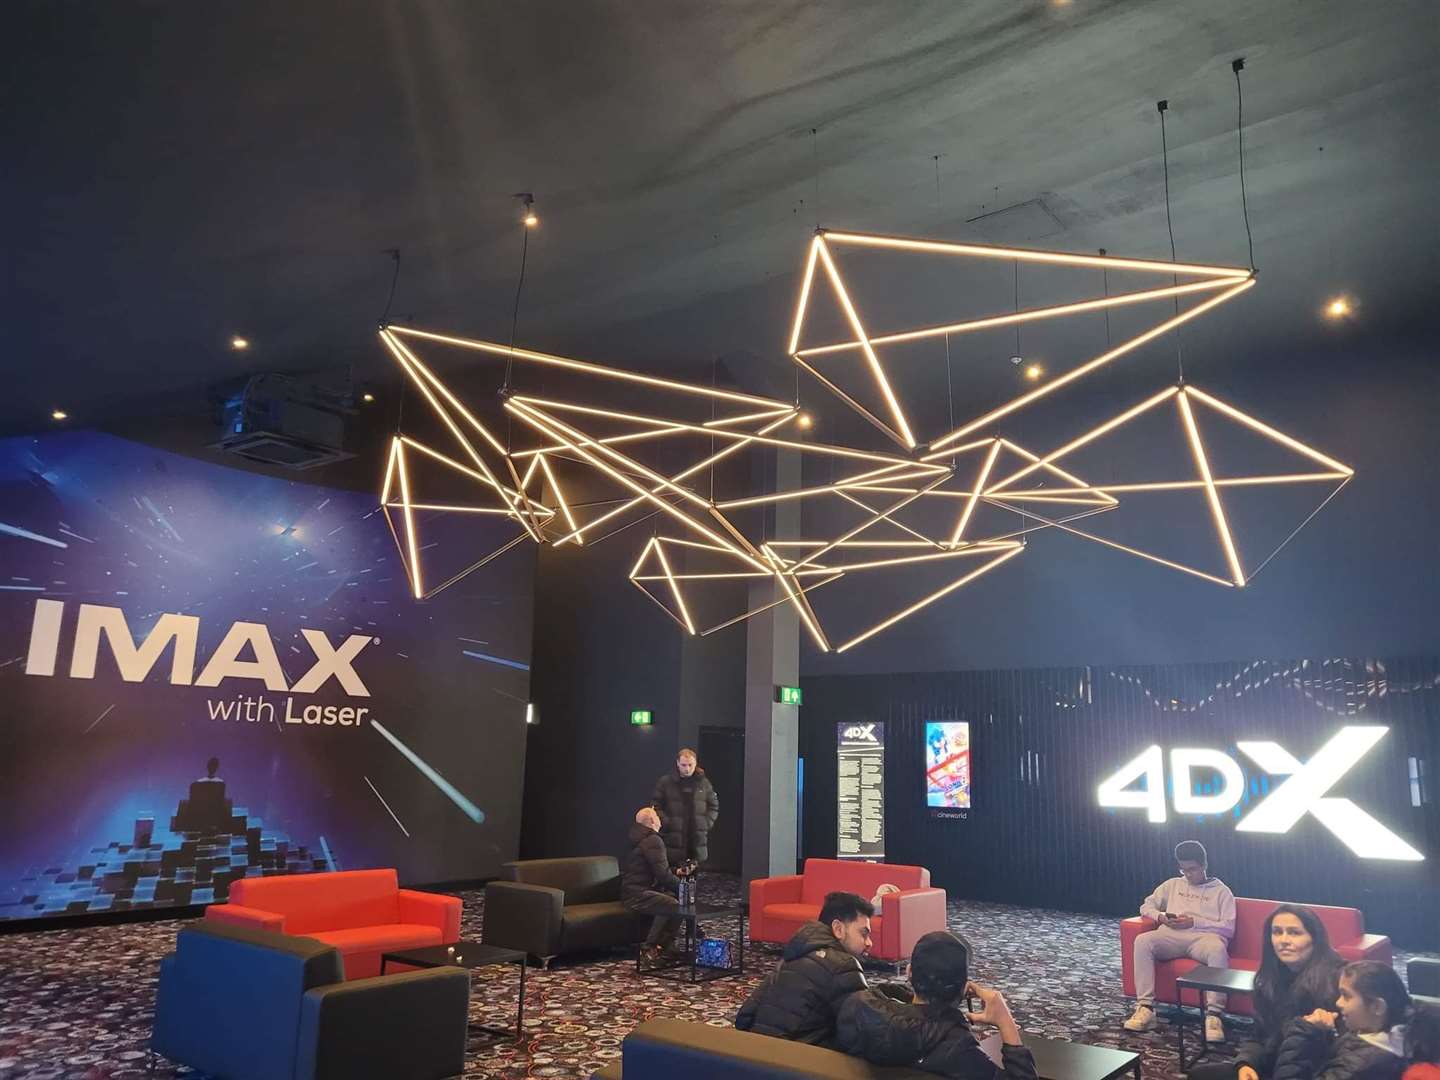 The foyer for the 4DX and IMAX screens